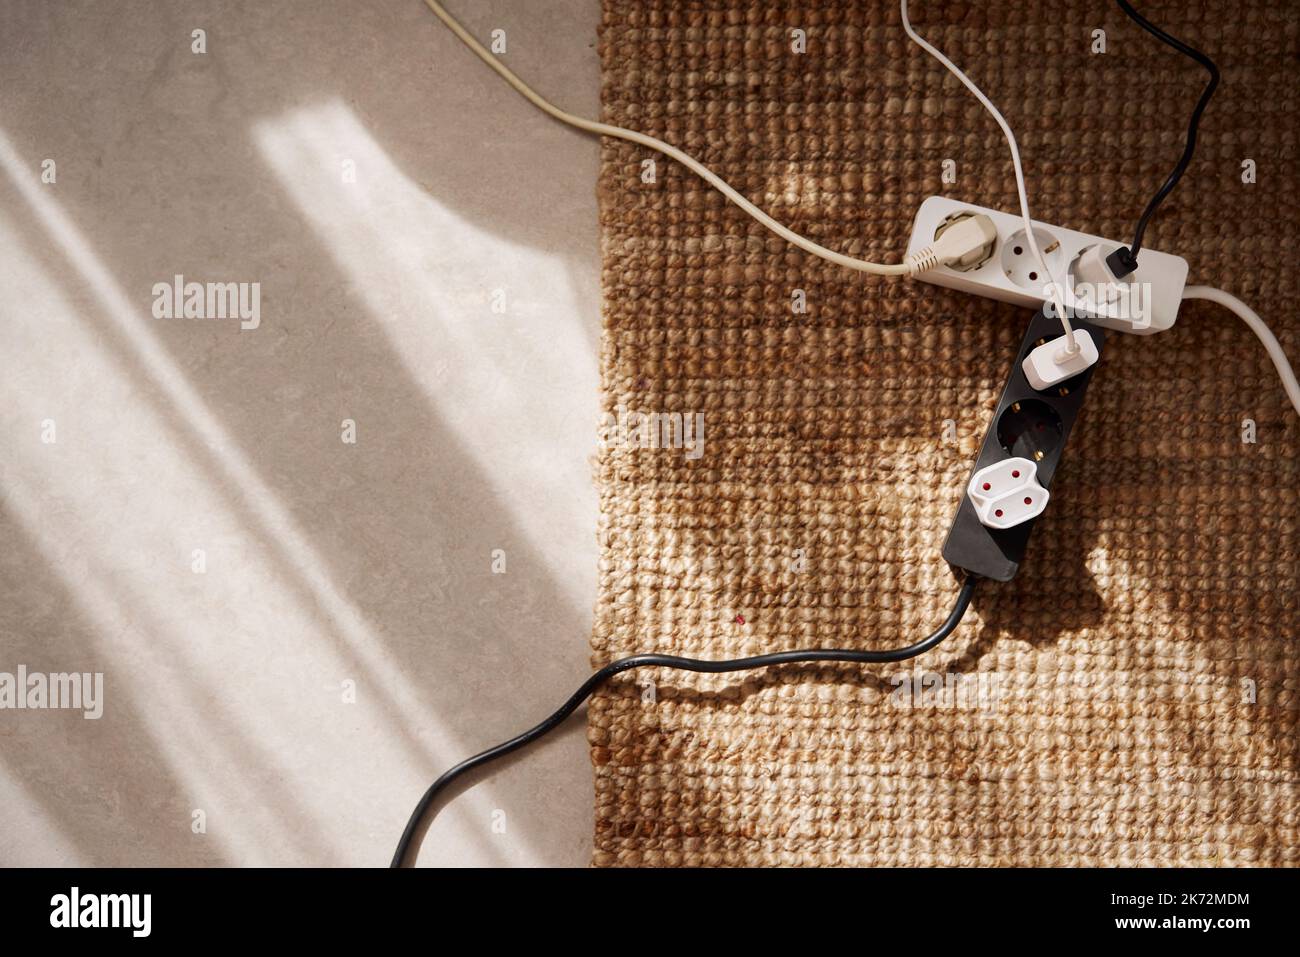 Plugs in extension cords Stock Photo